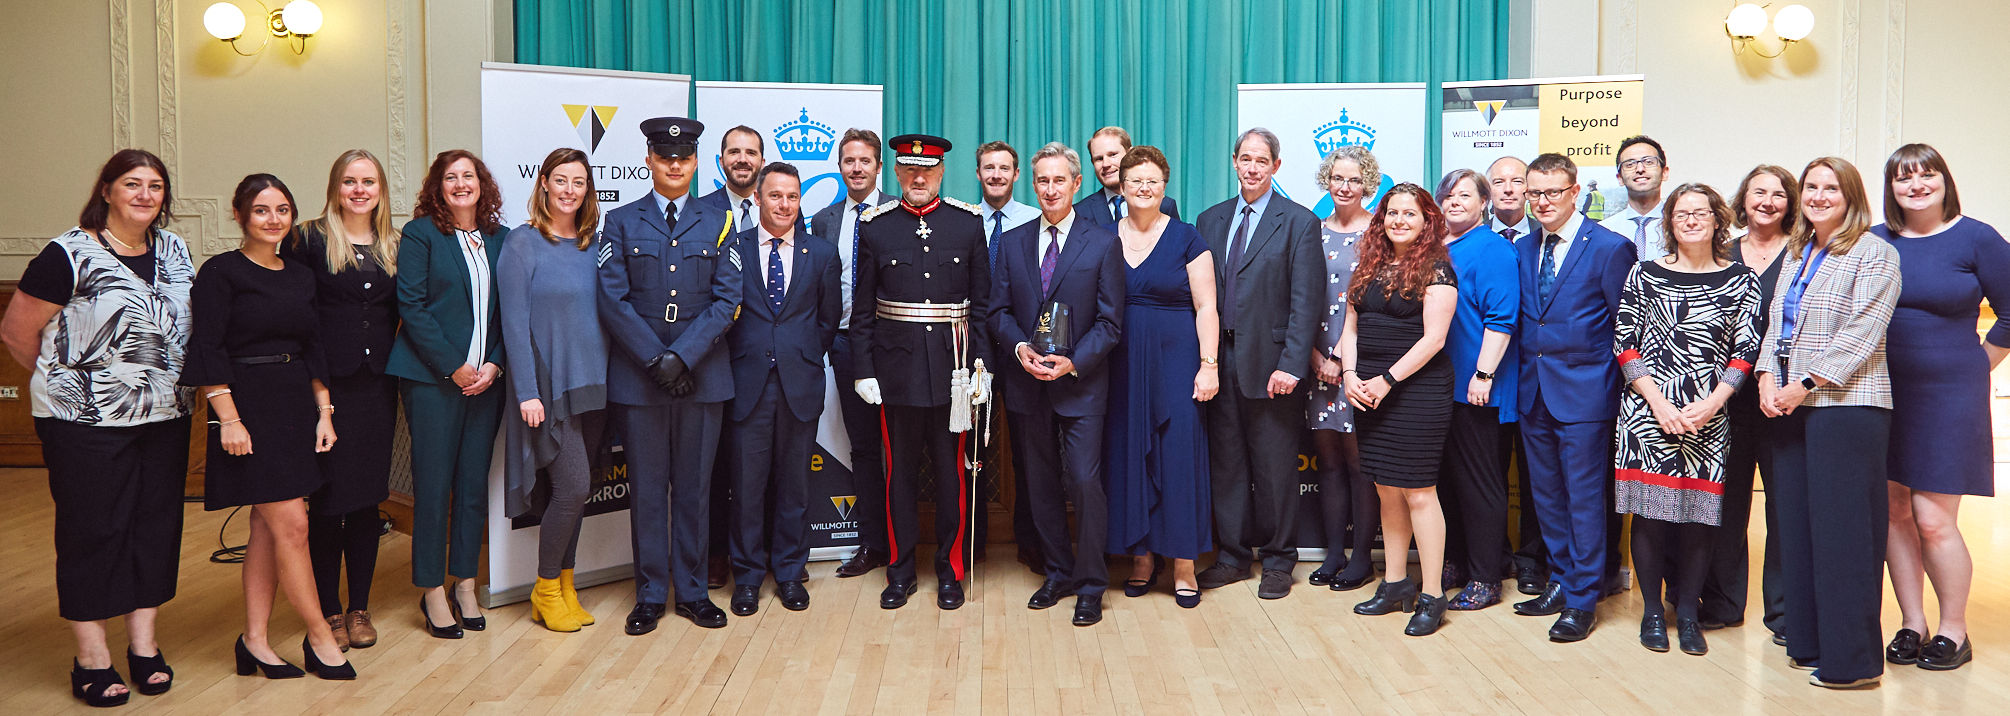 Queen's awards presentation - group picture SD team 2.jpg